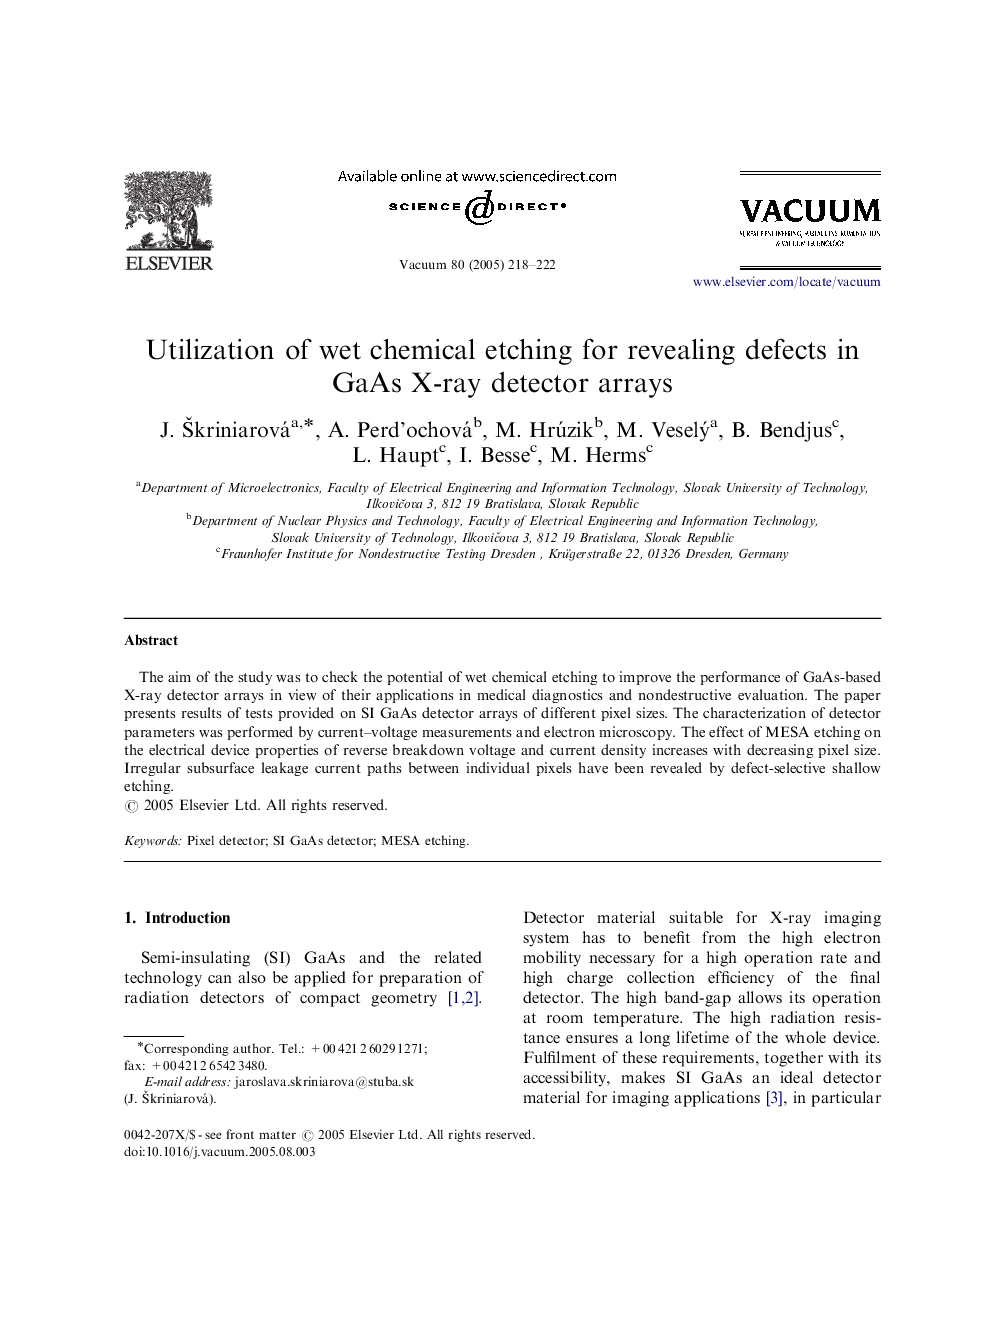 Utilization of wet chemical etching for revealing defects in GaAs X-ray detector arrays